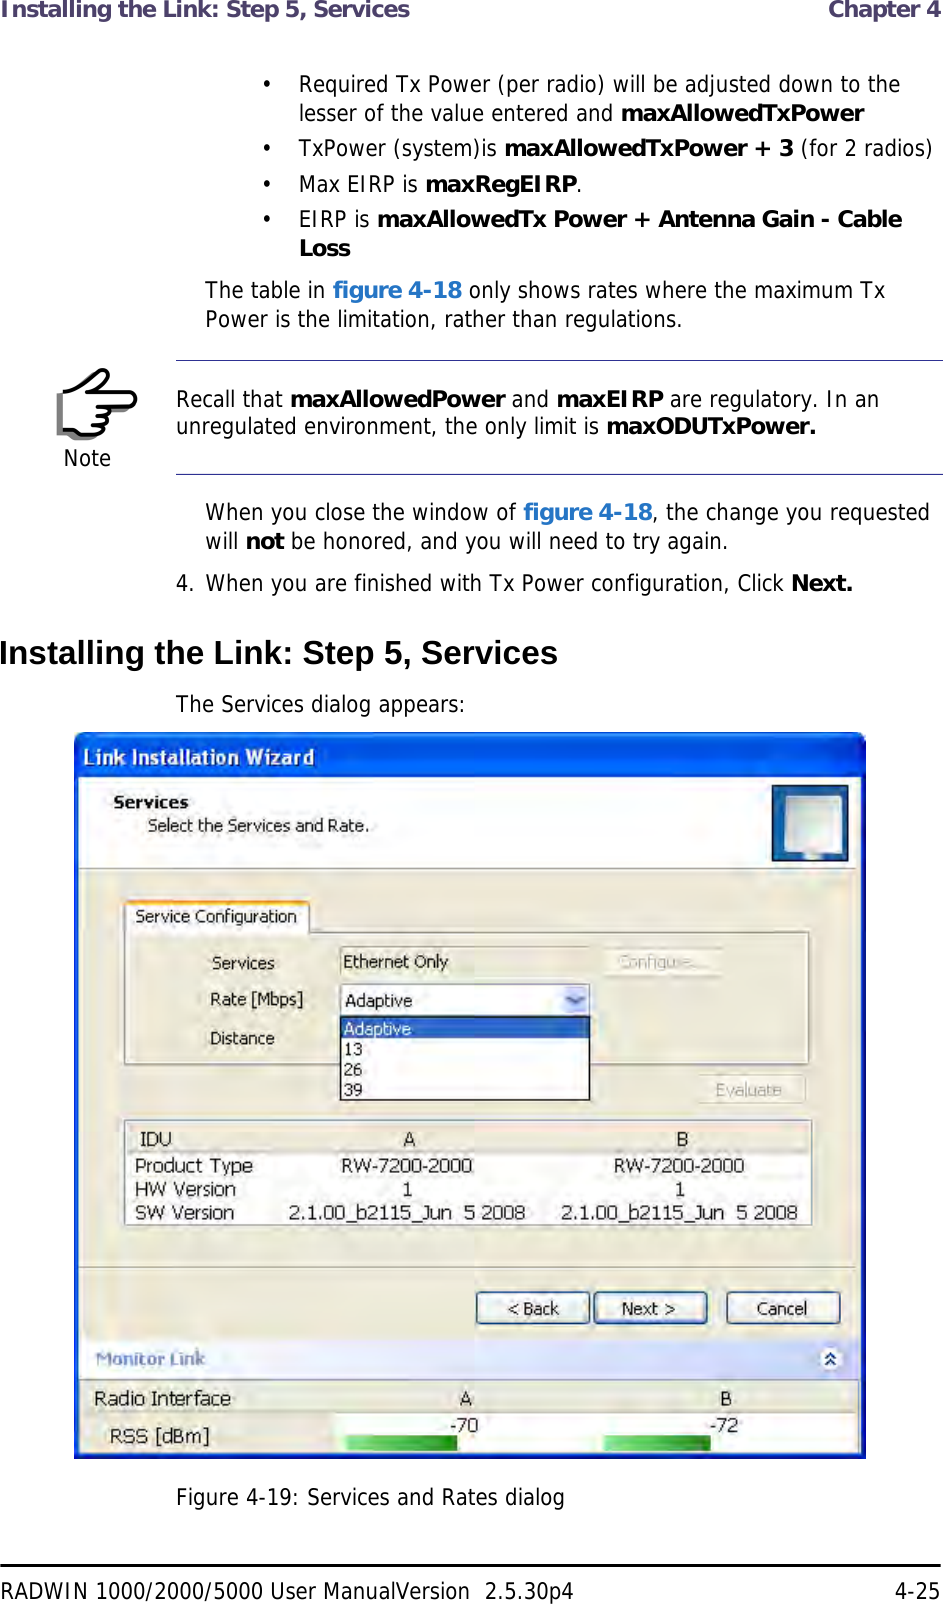 Installing the Link: Step 5, Services  Chapter 4RADWIN 1000/2000/5000 User ManualVersion  2.5.30p4 4-25• Required Tx Power (per radio) will be adjusted down to the lesser of the value entered and maxAllowedTxPower• TxPower (system)is maxAllowedTxPower + 3 (for 2 radios)• Max EIRP is maxRegEIRP.• EIRP is maxAllowedTx Power + Antenna Gain - Cable LossThe table in figure 4-18 only shows rates where the maximum Tx Power is the limitation, rather than regulations.When you close the window of figure 4-18, the change you requested will not be honored, and you will need to try again.4. When you are finished with Tx Power configuration, Click Next.Installing the Link: Step 5, ServicesThe Services dialog appears:Figure 4-19: Services and Rates dialogNoteRecall that maxAllowedPower and maxEIRP are regulatory. In an unregulated environment, the only limit is maxODUTxPower.